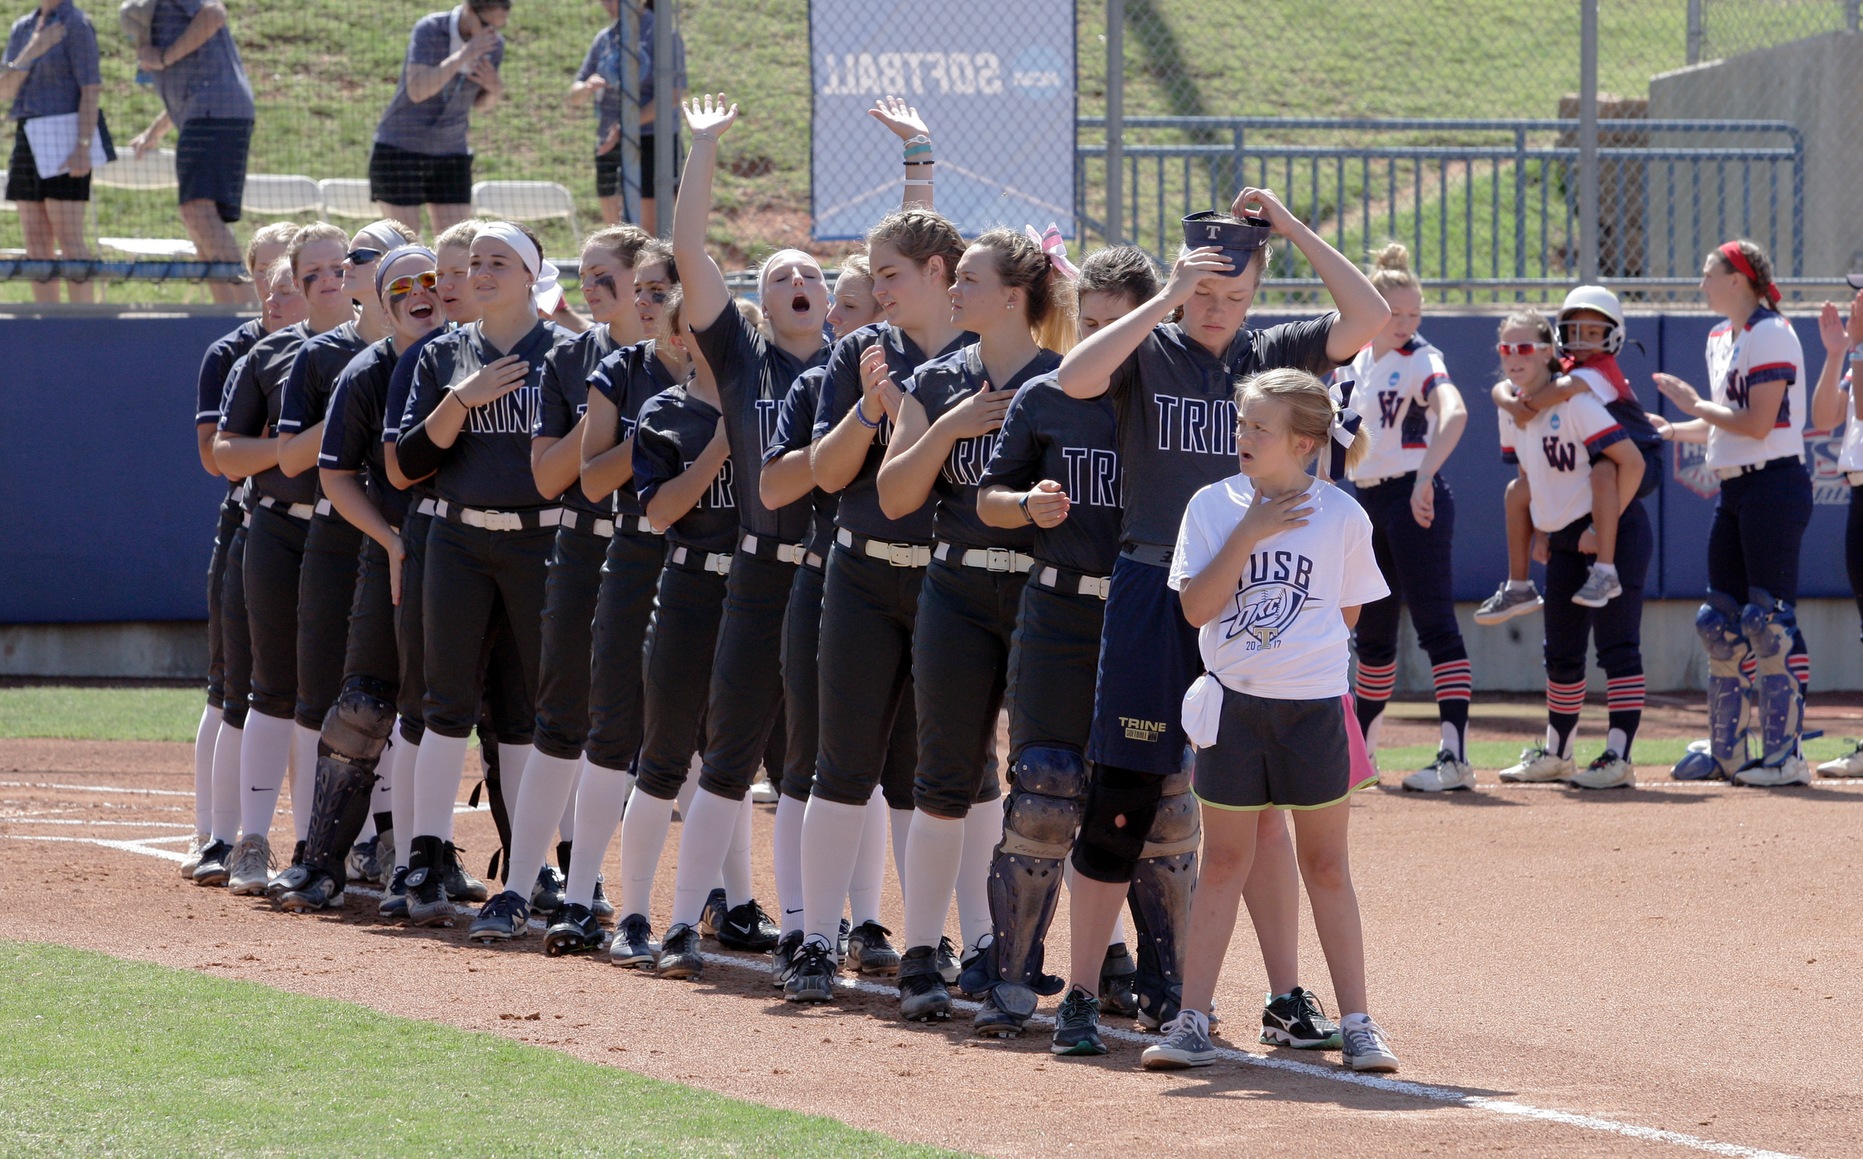 Thunder Ranked Sixth in First NFCA Top 25 Rankings